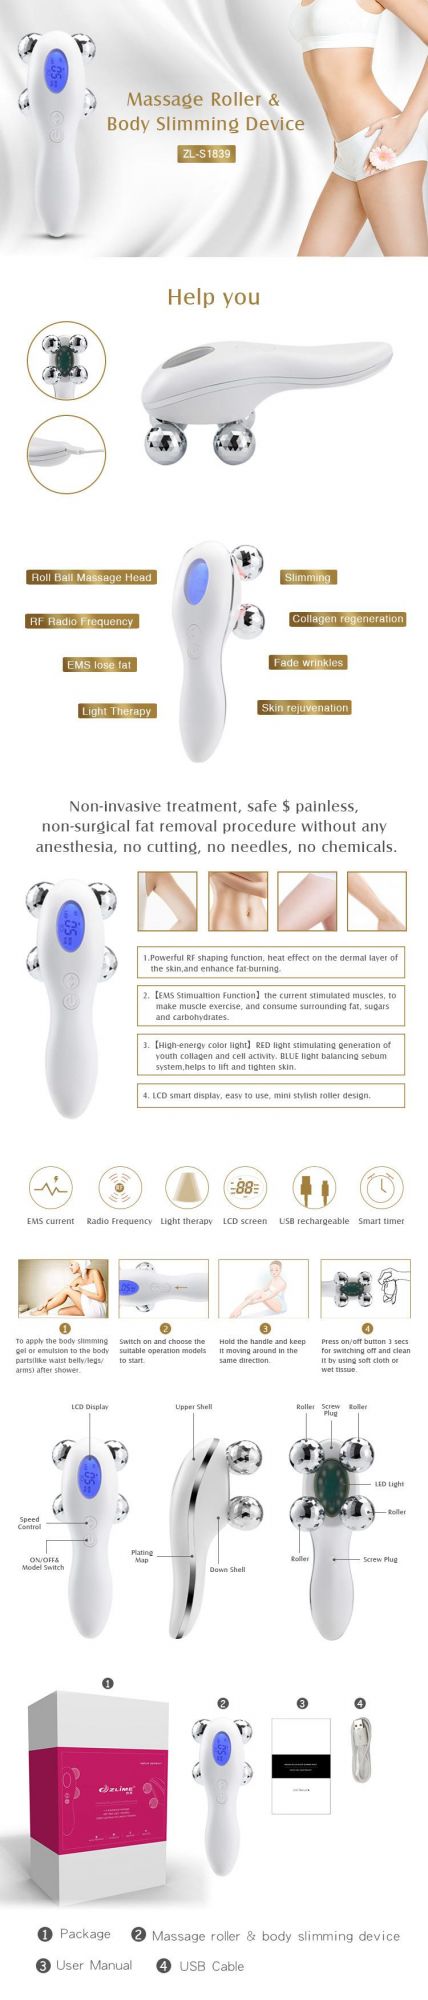 Massage Roller & Body Slimming Device, Slimming Massager, Electric Beauty Equipment, OEM